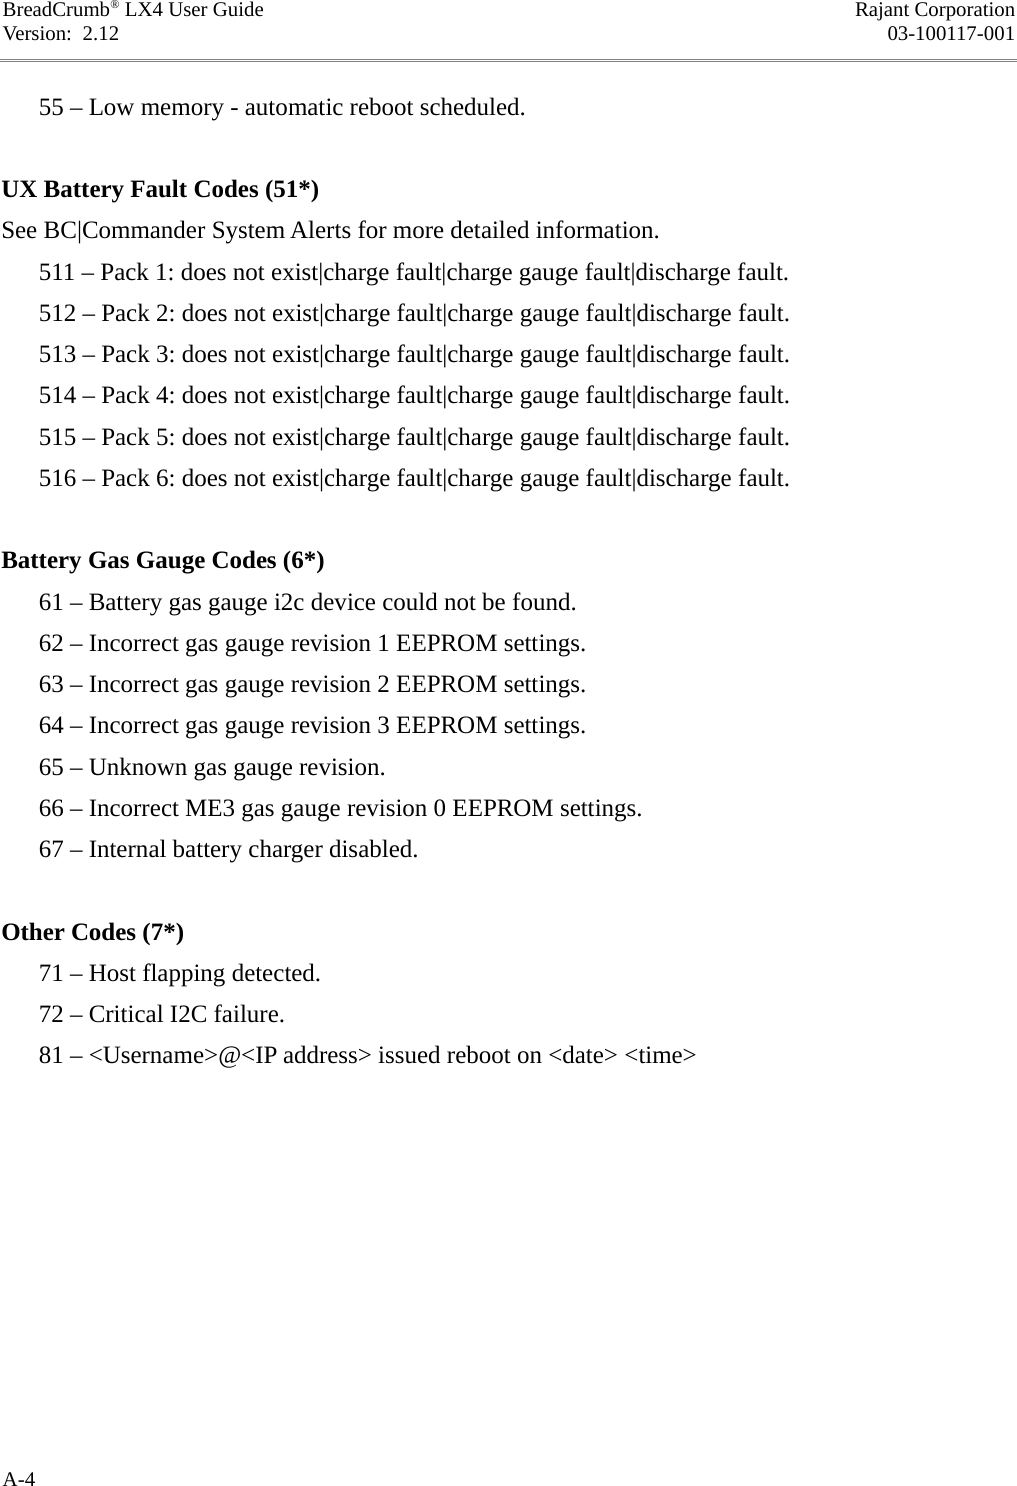 BreadCrumb® LX4 User Guide Rajant CorporationVersion:  2.12 03-100117-001      55 – Low memory - automatic reboot scheduled.UX Battery Fault Codes (51*)See BC|Commander System Alerts for more detailed information.      511 – Pack 1: does not exist|charge fault|charge gauge fault|discharge fault.      512 – Pack 2: does not exist|charge fault|charge gauge fault|discharge fault.      513 – Pack 3: does not exist|charge fault|charge gauge fault|discharge fault.      514 – Pack 4: does not exist|charge fault|charge gauge fault|discharge fault.      515 – Pack 5: does not exist|charge fault|charge gauge fault|discharge fault.      516 – Pack 6: does not exist|charge fault|charge gauge fault|discharge fault.Battery Gas Gauge Codes (6*)      61 – Battery gas gauge i2c device could not be found.      62 – Incorrect gas gauge revision 1 EEPROM settings.      63 – Incorrect gas gauge revision 2 EEPROM settings.      64 – Incorrect gas gauge revision 3 EEPROM settings.      65 – Unknown gas gauge revision.      66 – Incorrect ME3 gas gauge revision 0 EEPROM settings.      67 – Internal battery charger disabled.Other Codes (7*)      71 – Host flapping detected.      72 – Critical I2C failure.      81 – &lt;Username&gt;@&lt;IP address&gt; issued reboot on &lt;date&gt; &lt;time&gt;A-4